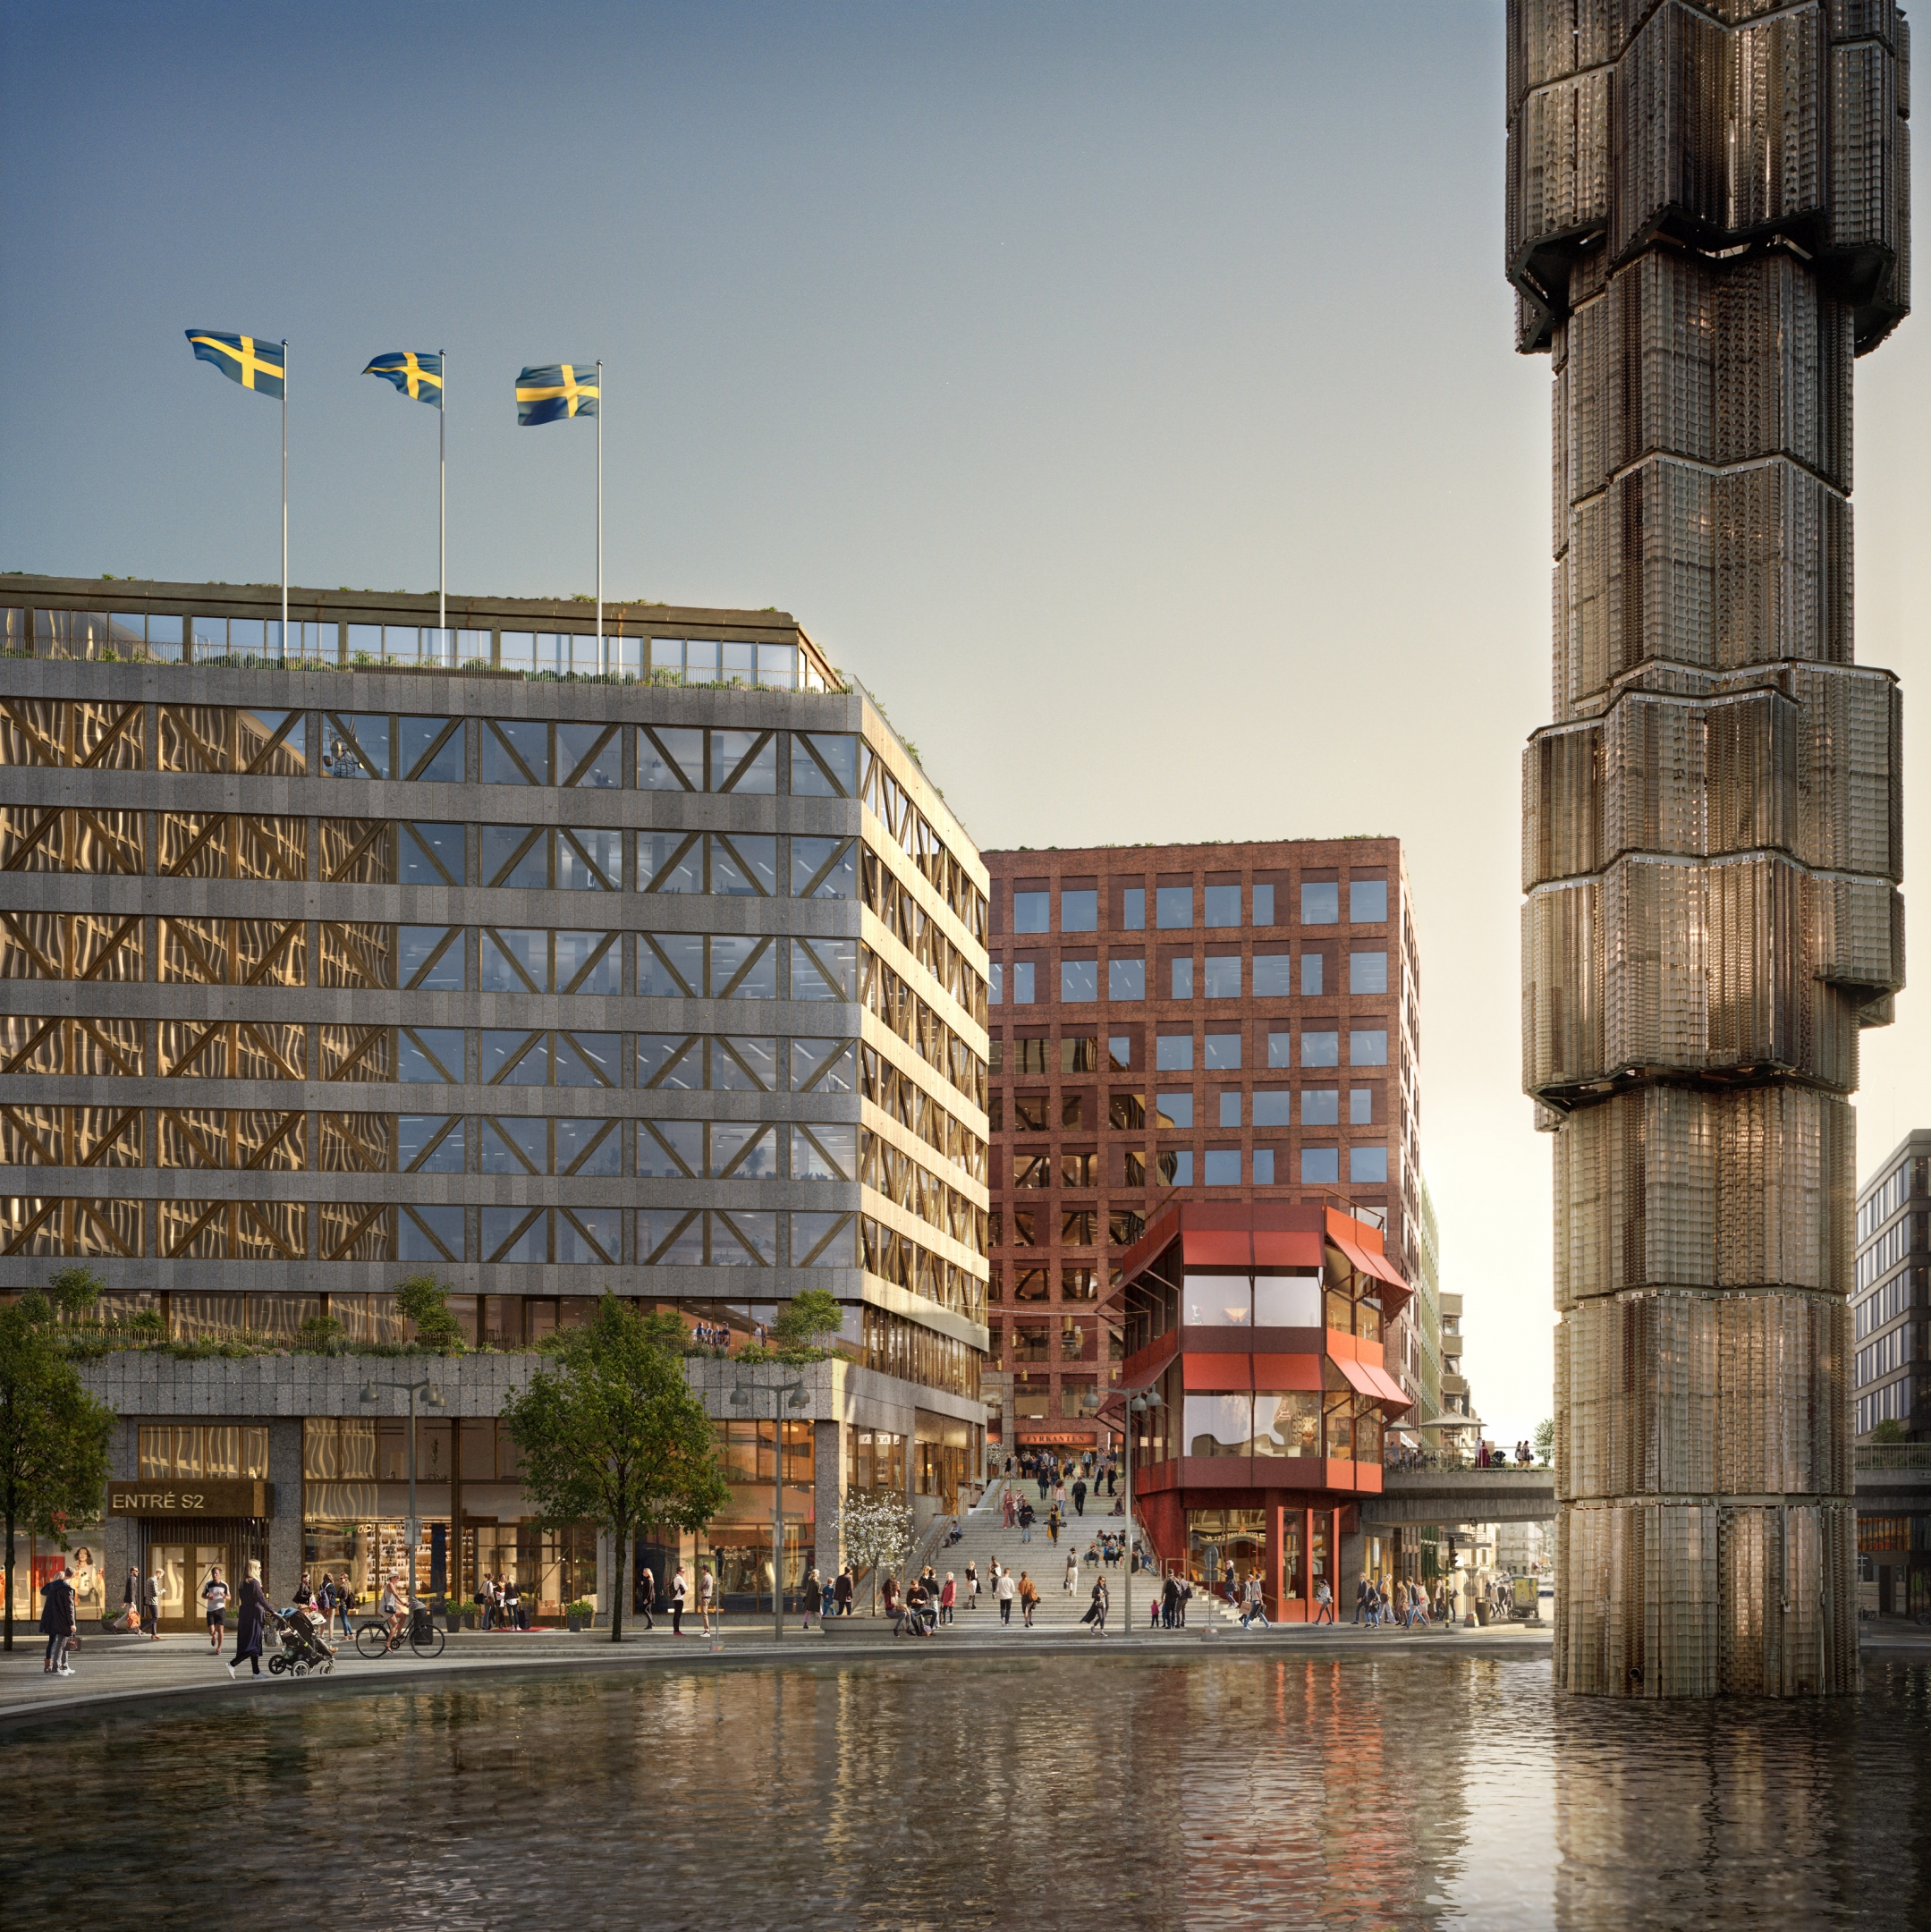 Architectural visualization of Sergelstan for Vasakronan. A image of several buildings in daylight. A big pond and people walking around in front of the buildings.